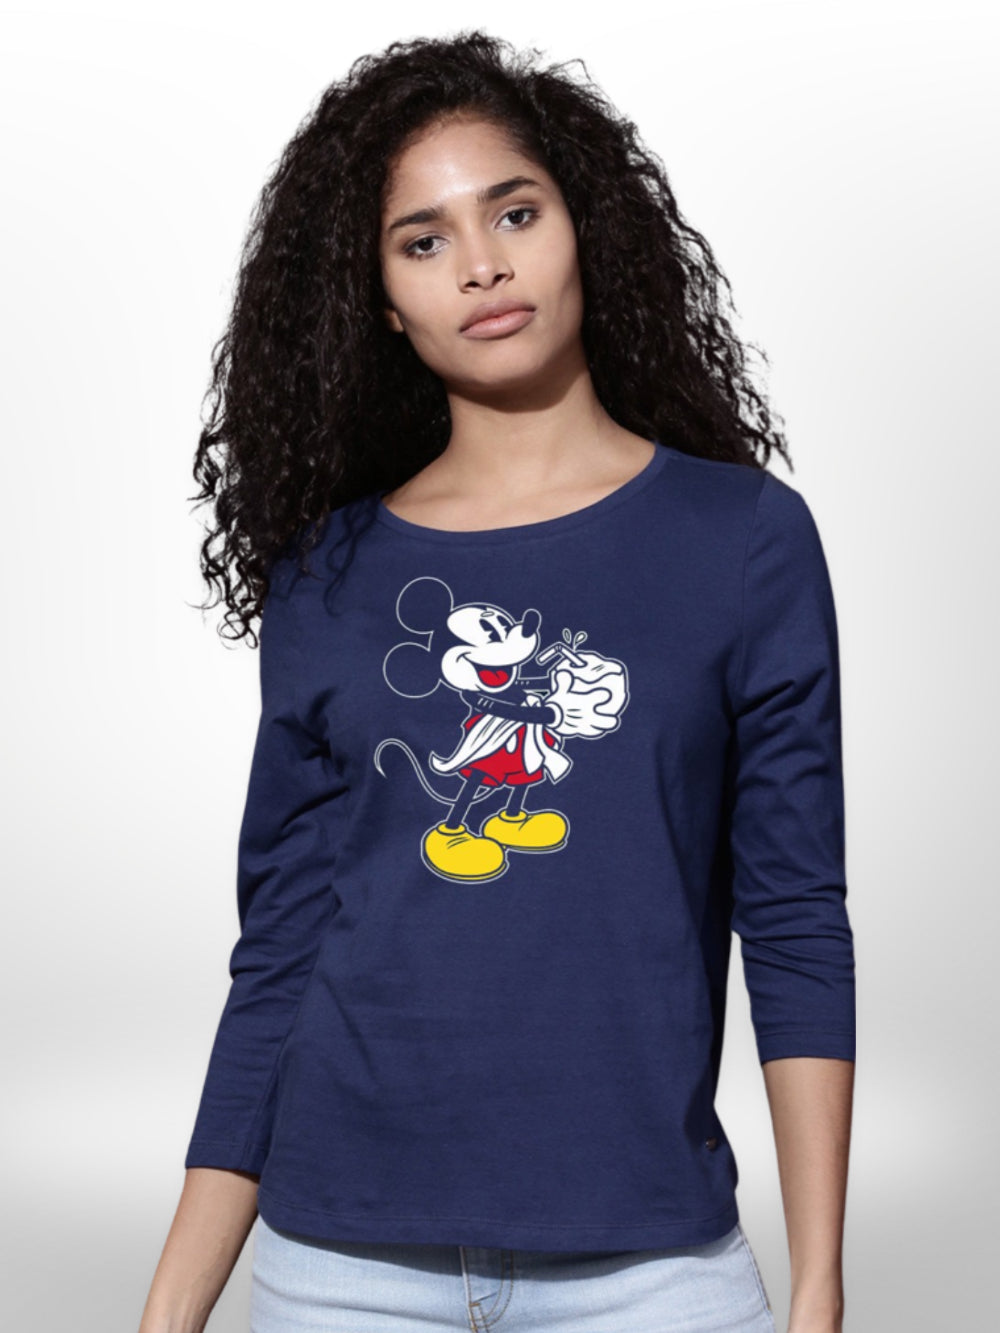 Mickey Mouse Printed Ladies T-shirt 4 Quarter Sleeve - Legacy Boutiques